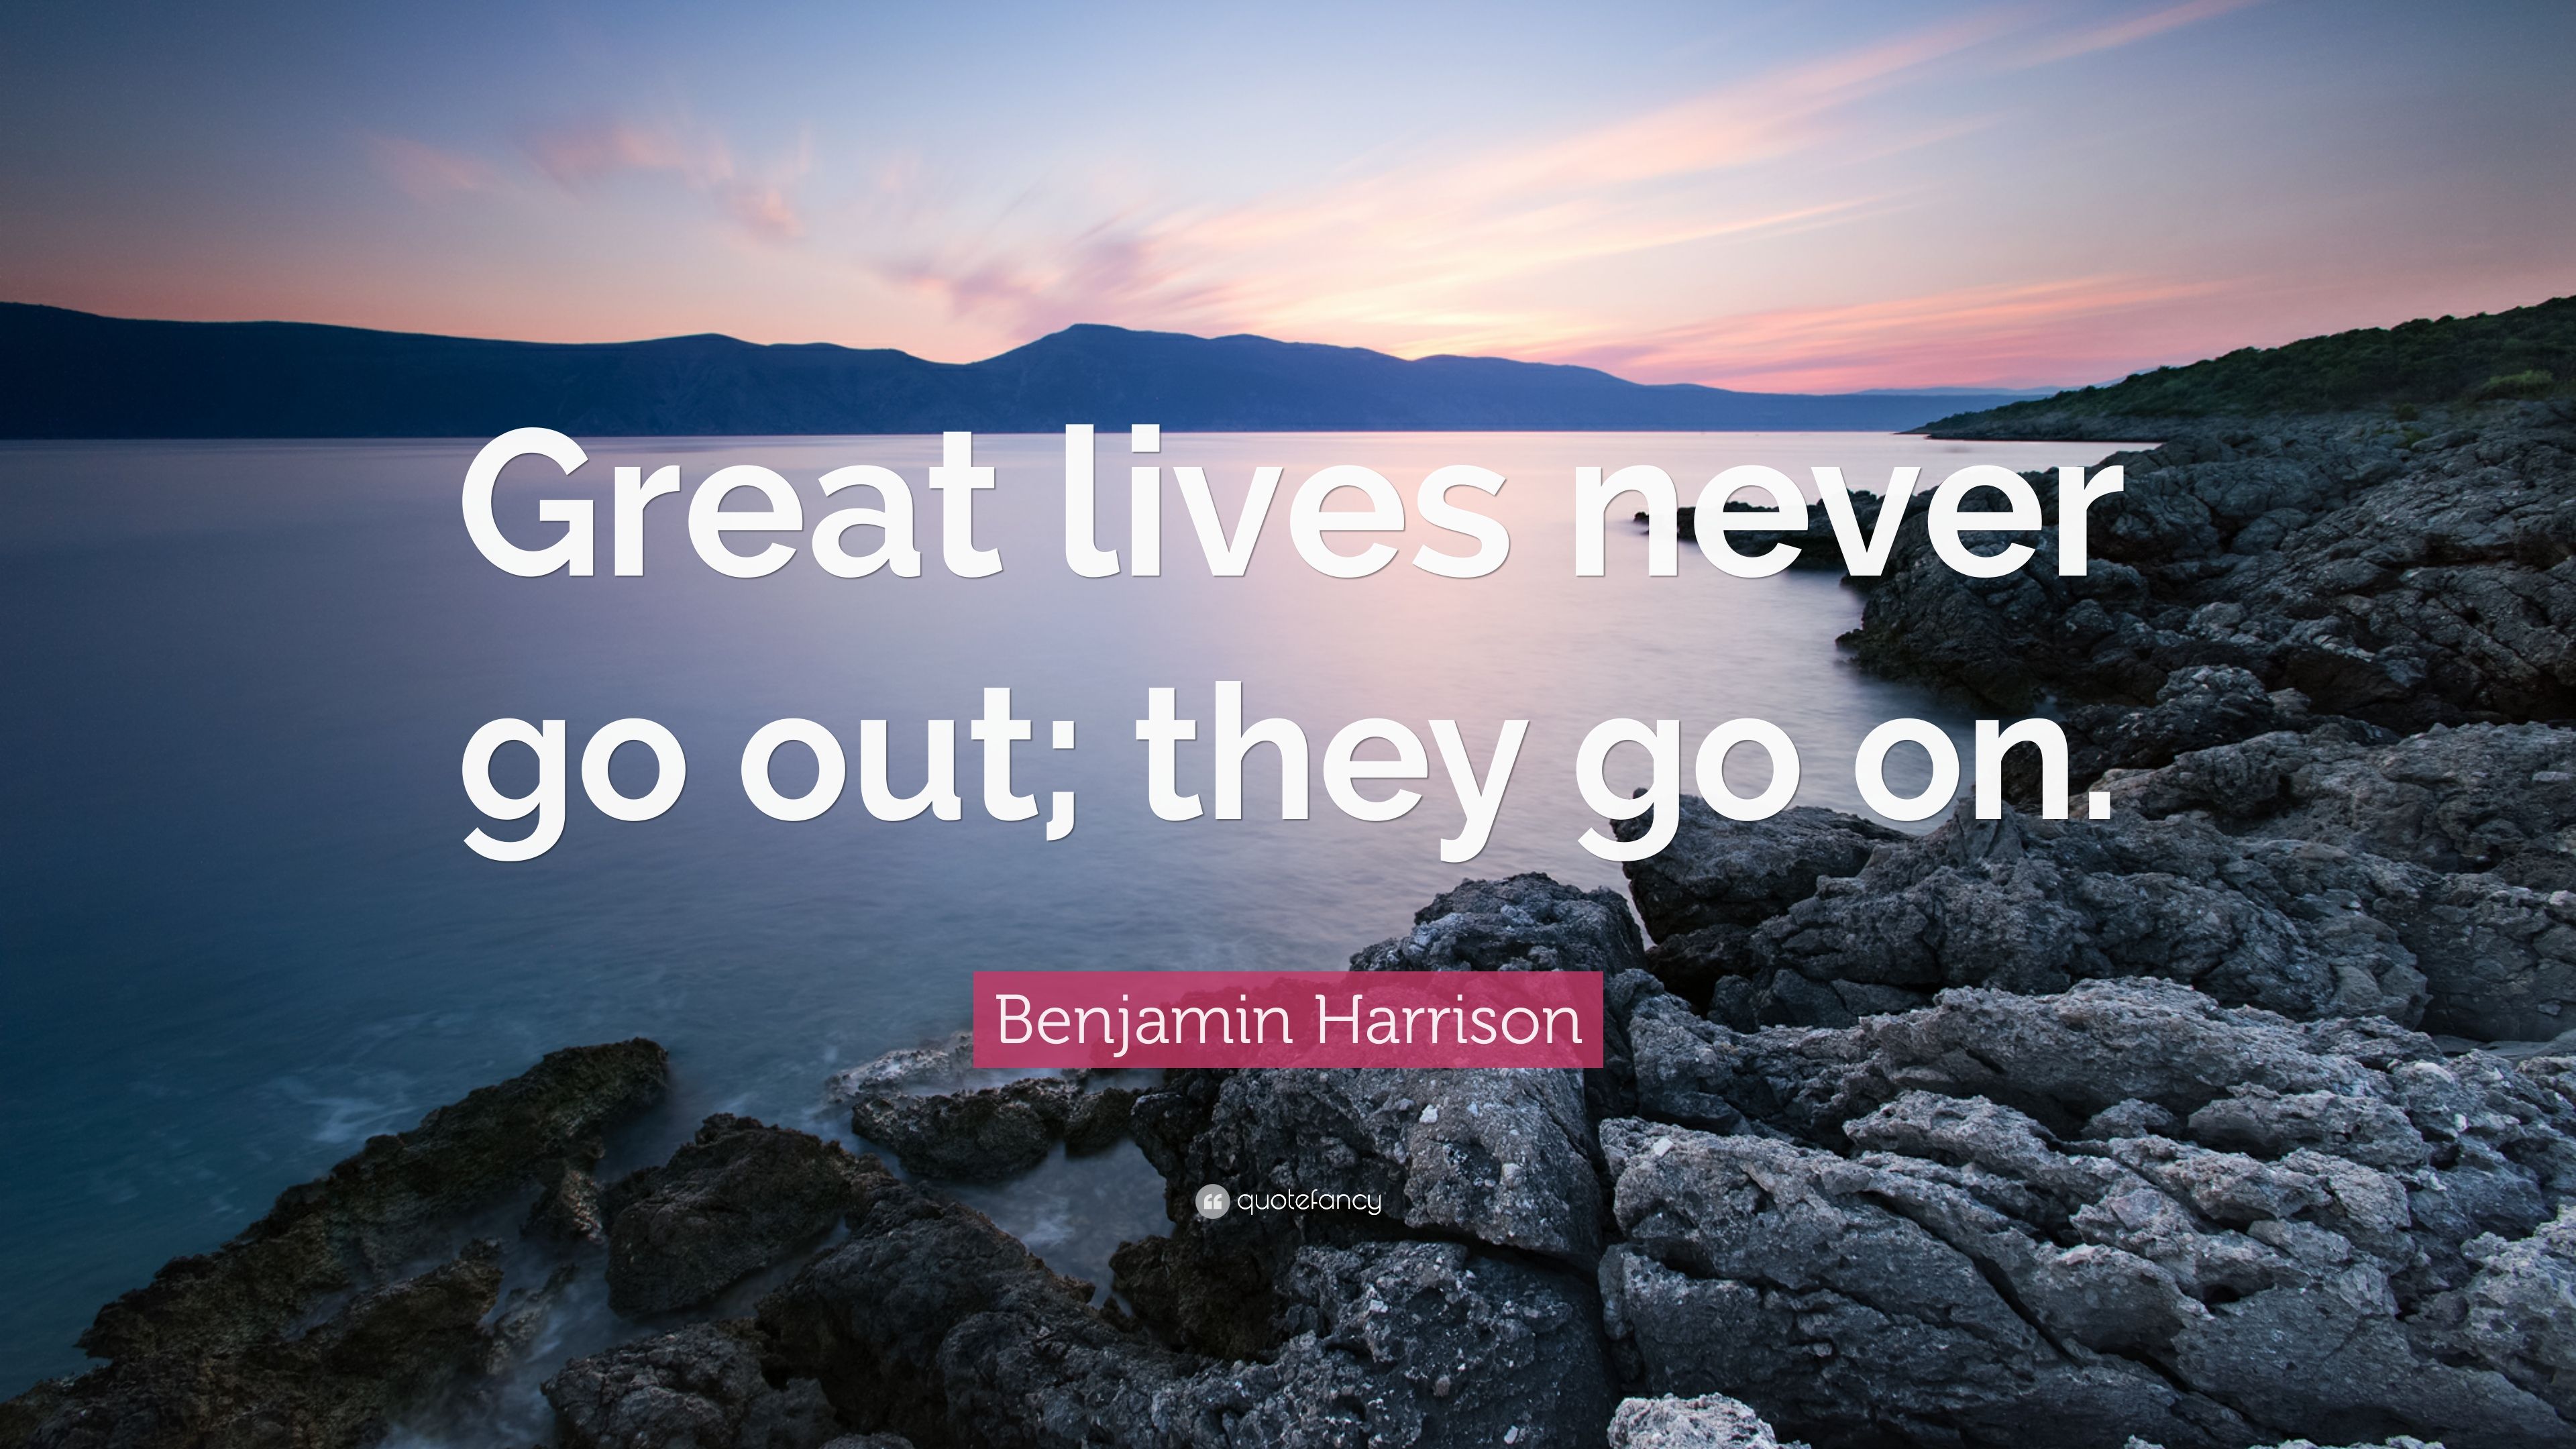 Benjamin Harrison Quote: “Great lives never go out; they go